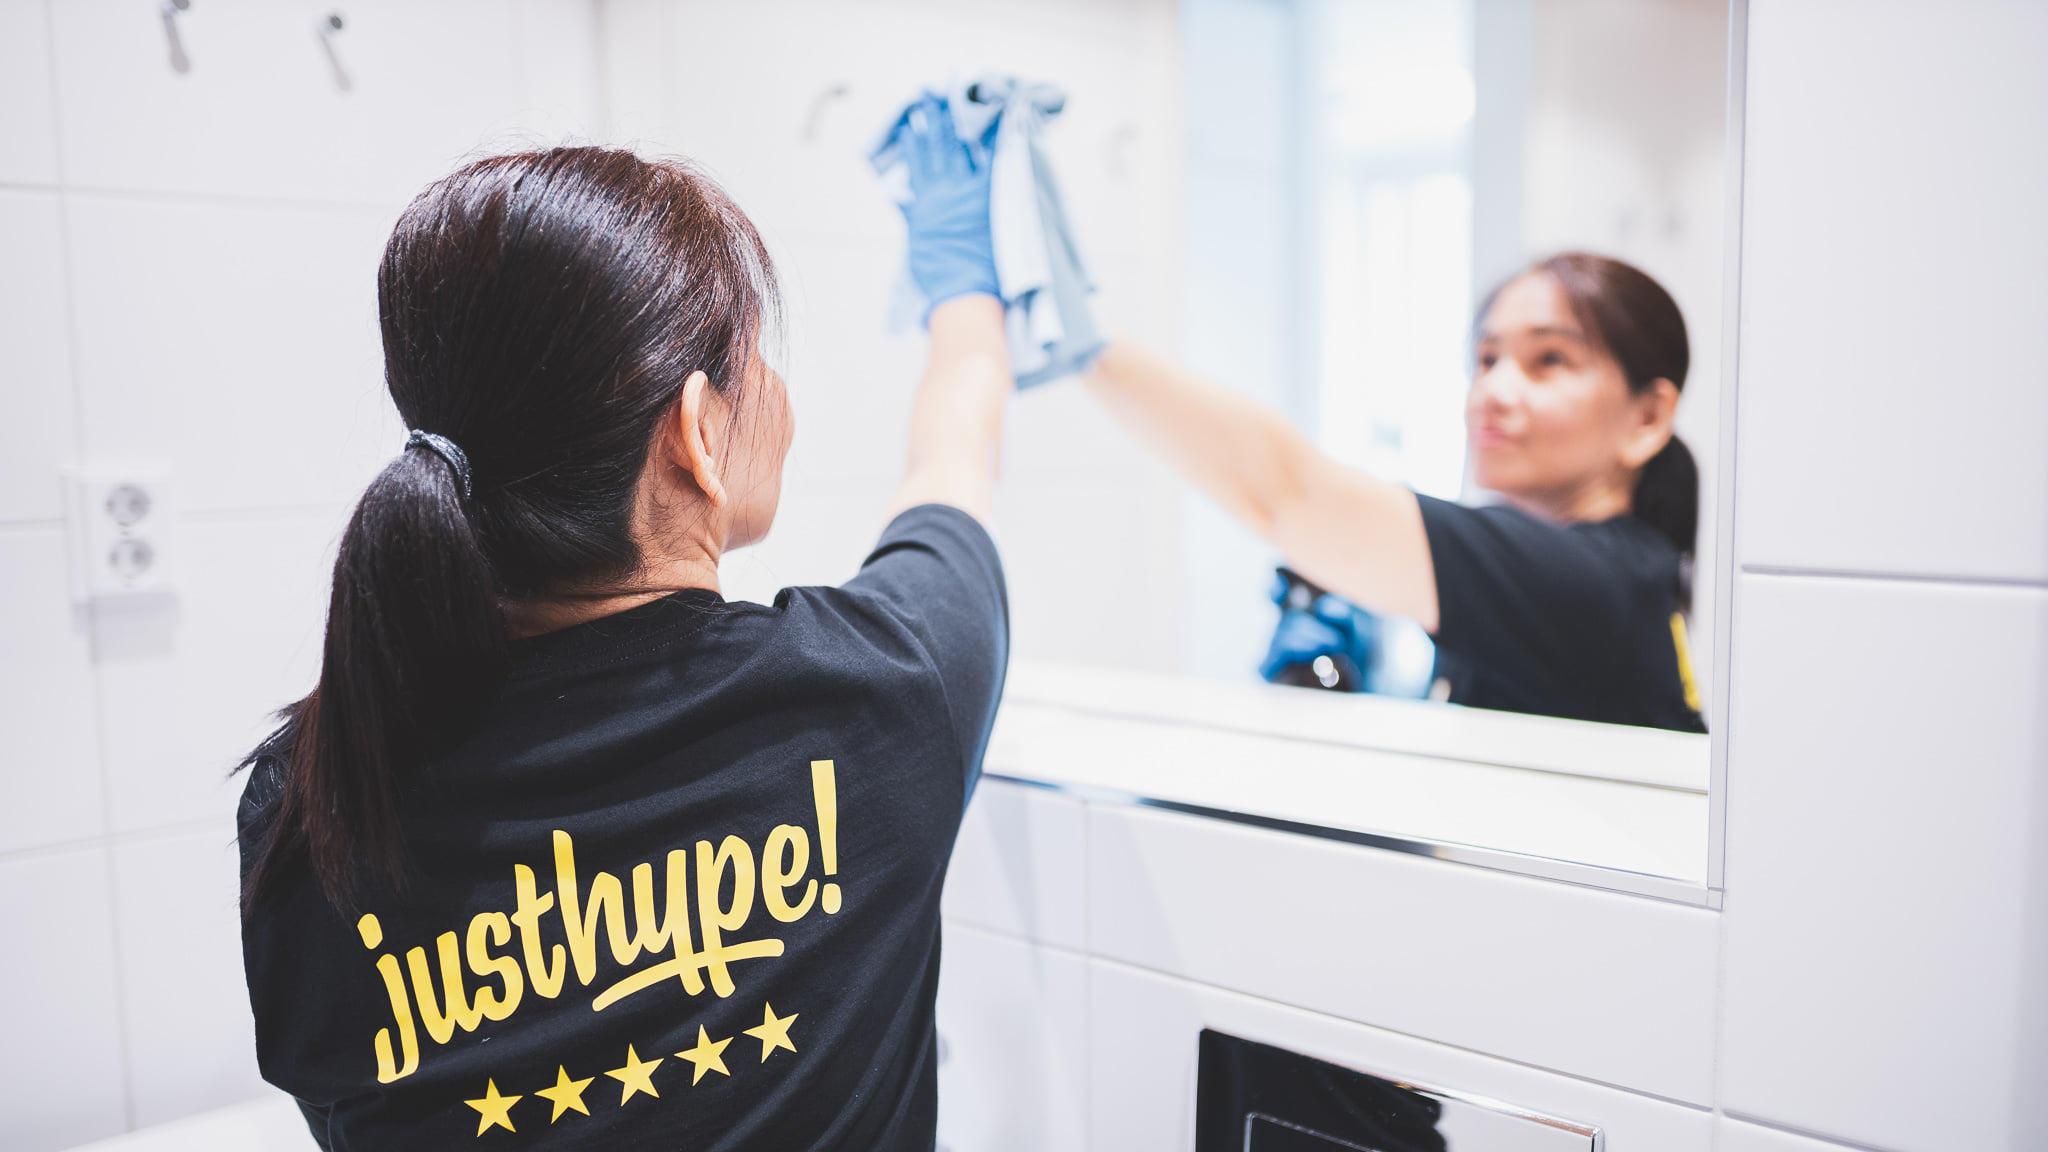 Images Hype Cleaning Services Oy / Hype Siivous